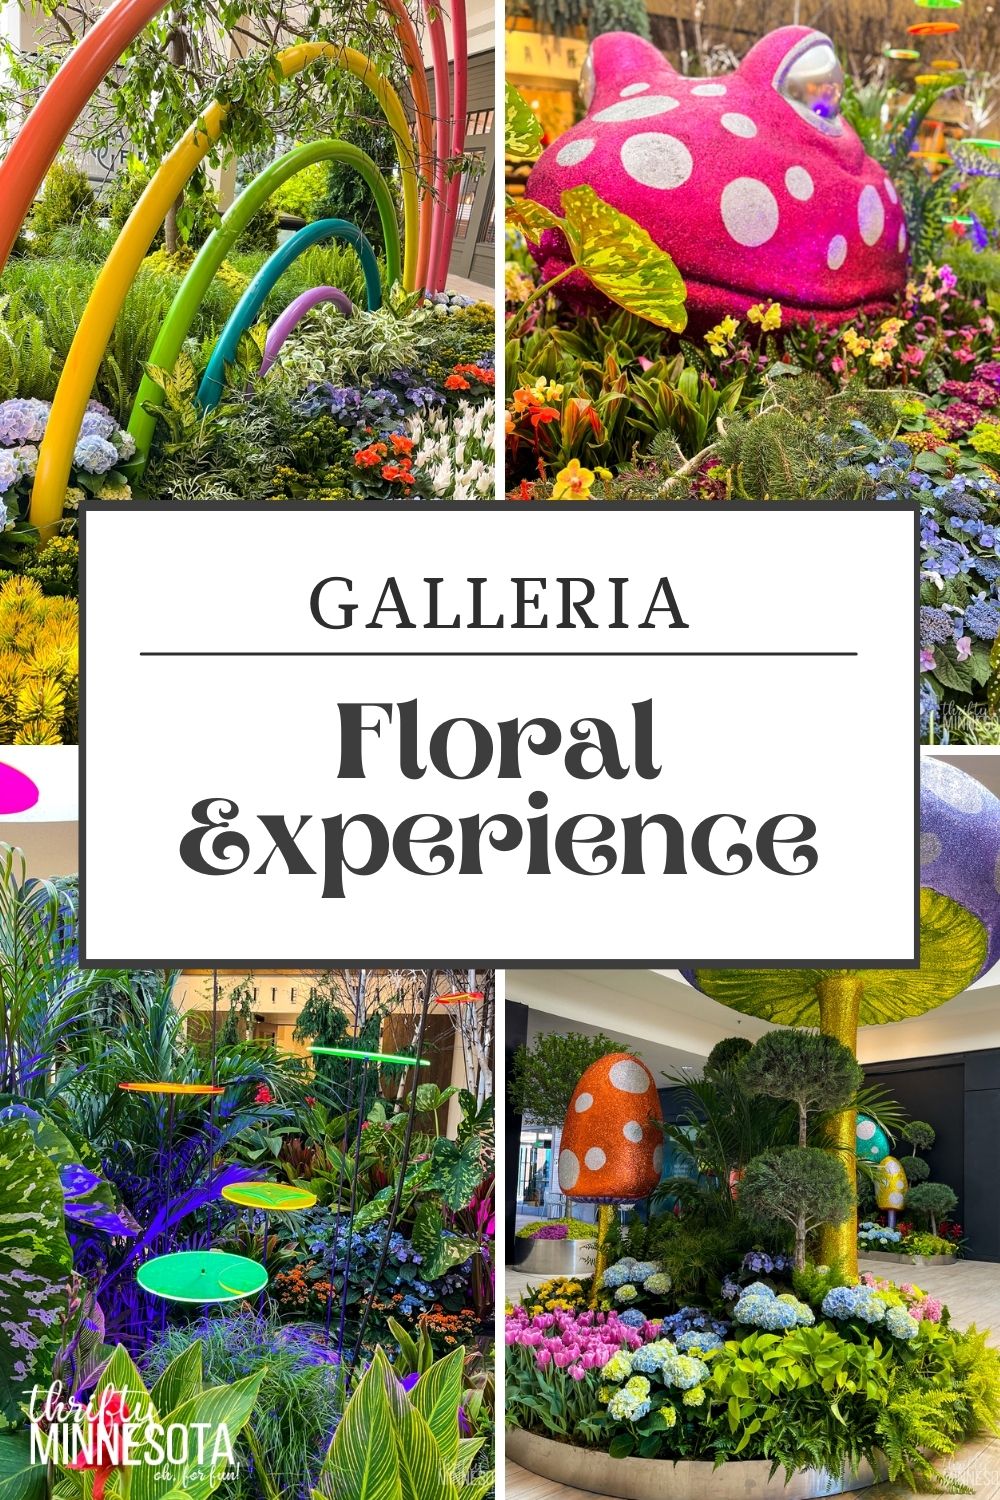 Galleria Floral Experience with Flowers by Bachman's Thrifty Minnesota